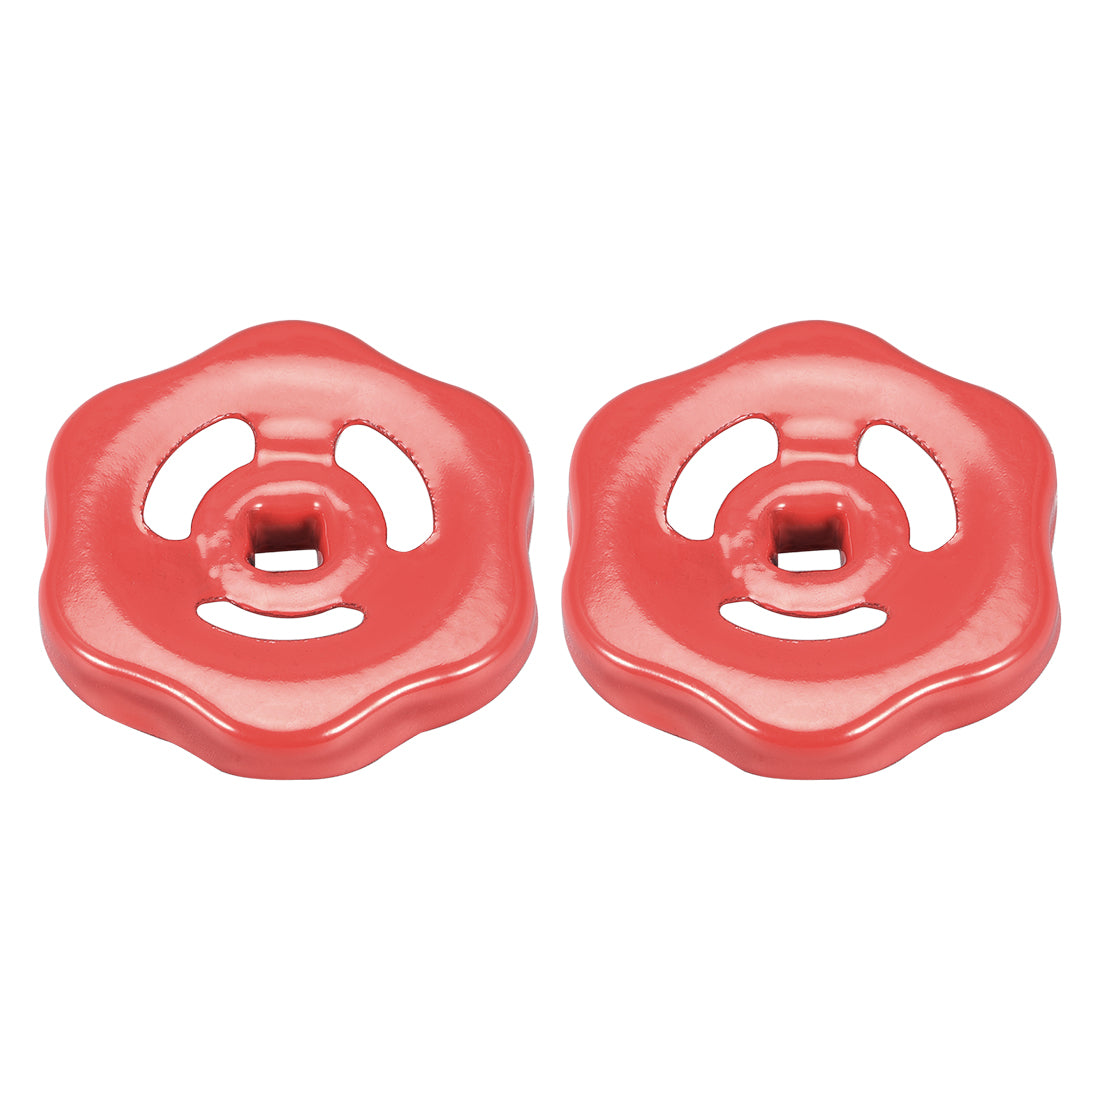 uxcell Uxcell Round Wheel Handle, Square Broach 7x7mm, Wheel OD 61mm Paint Iron Red 2Pcs